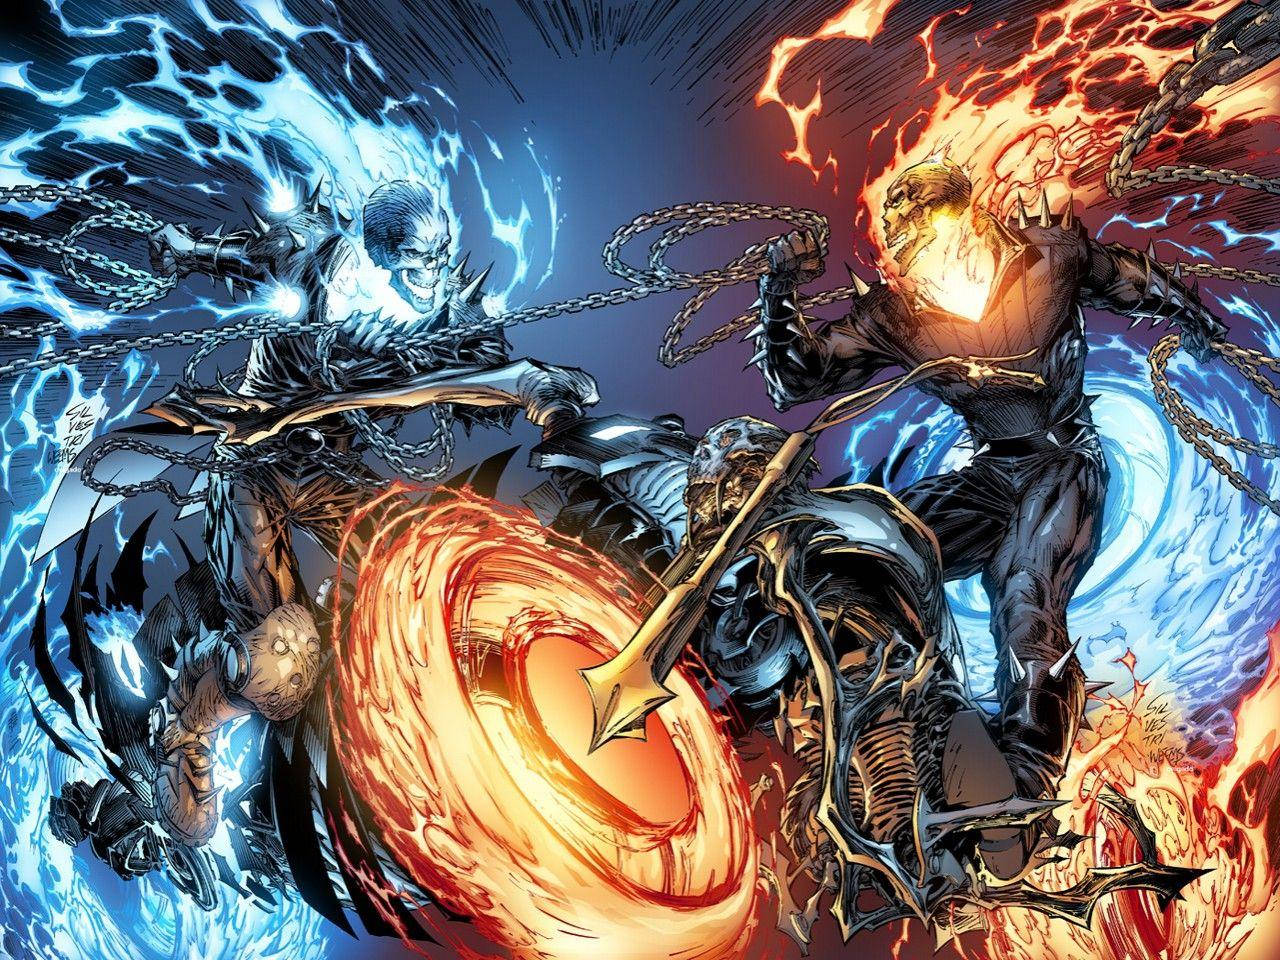 100+] Ghost Rider Wallpapers for FREE | Wallpapers.com